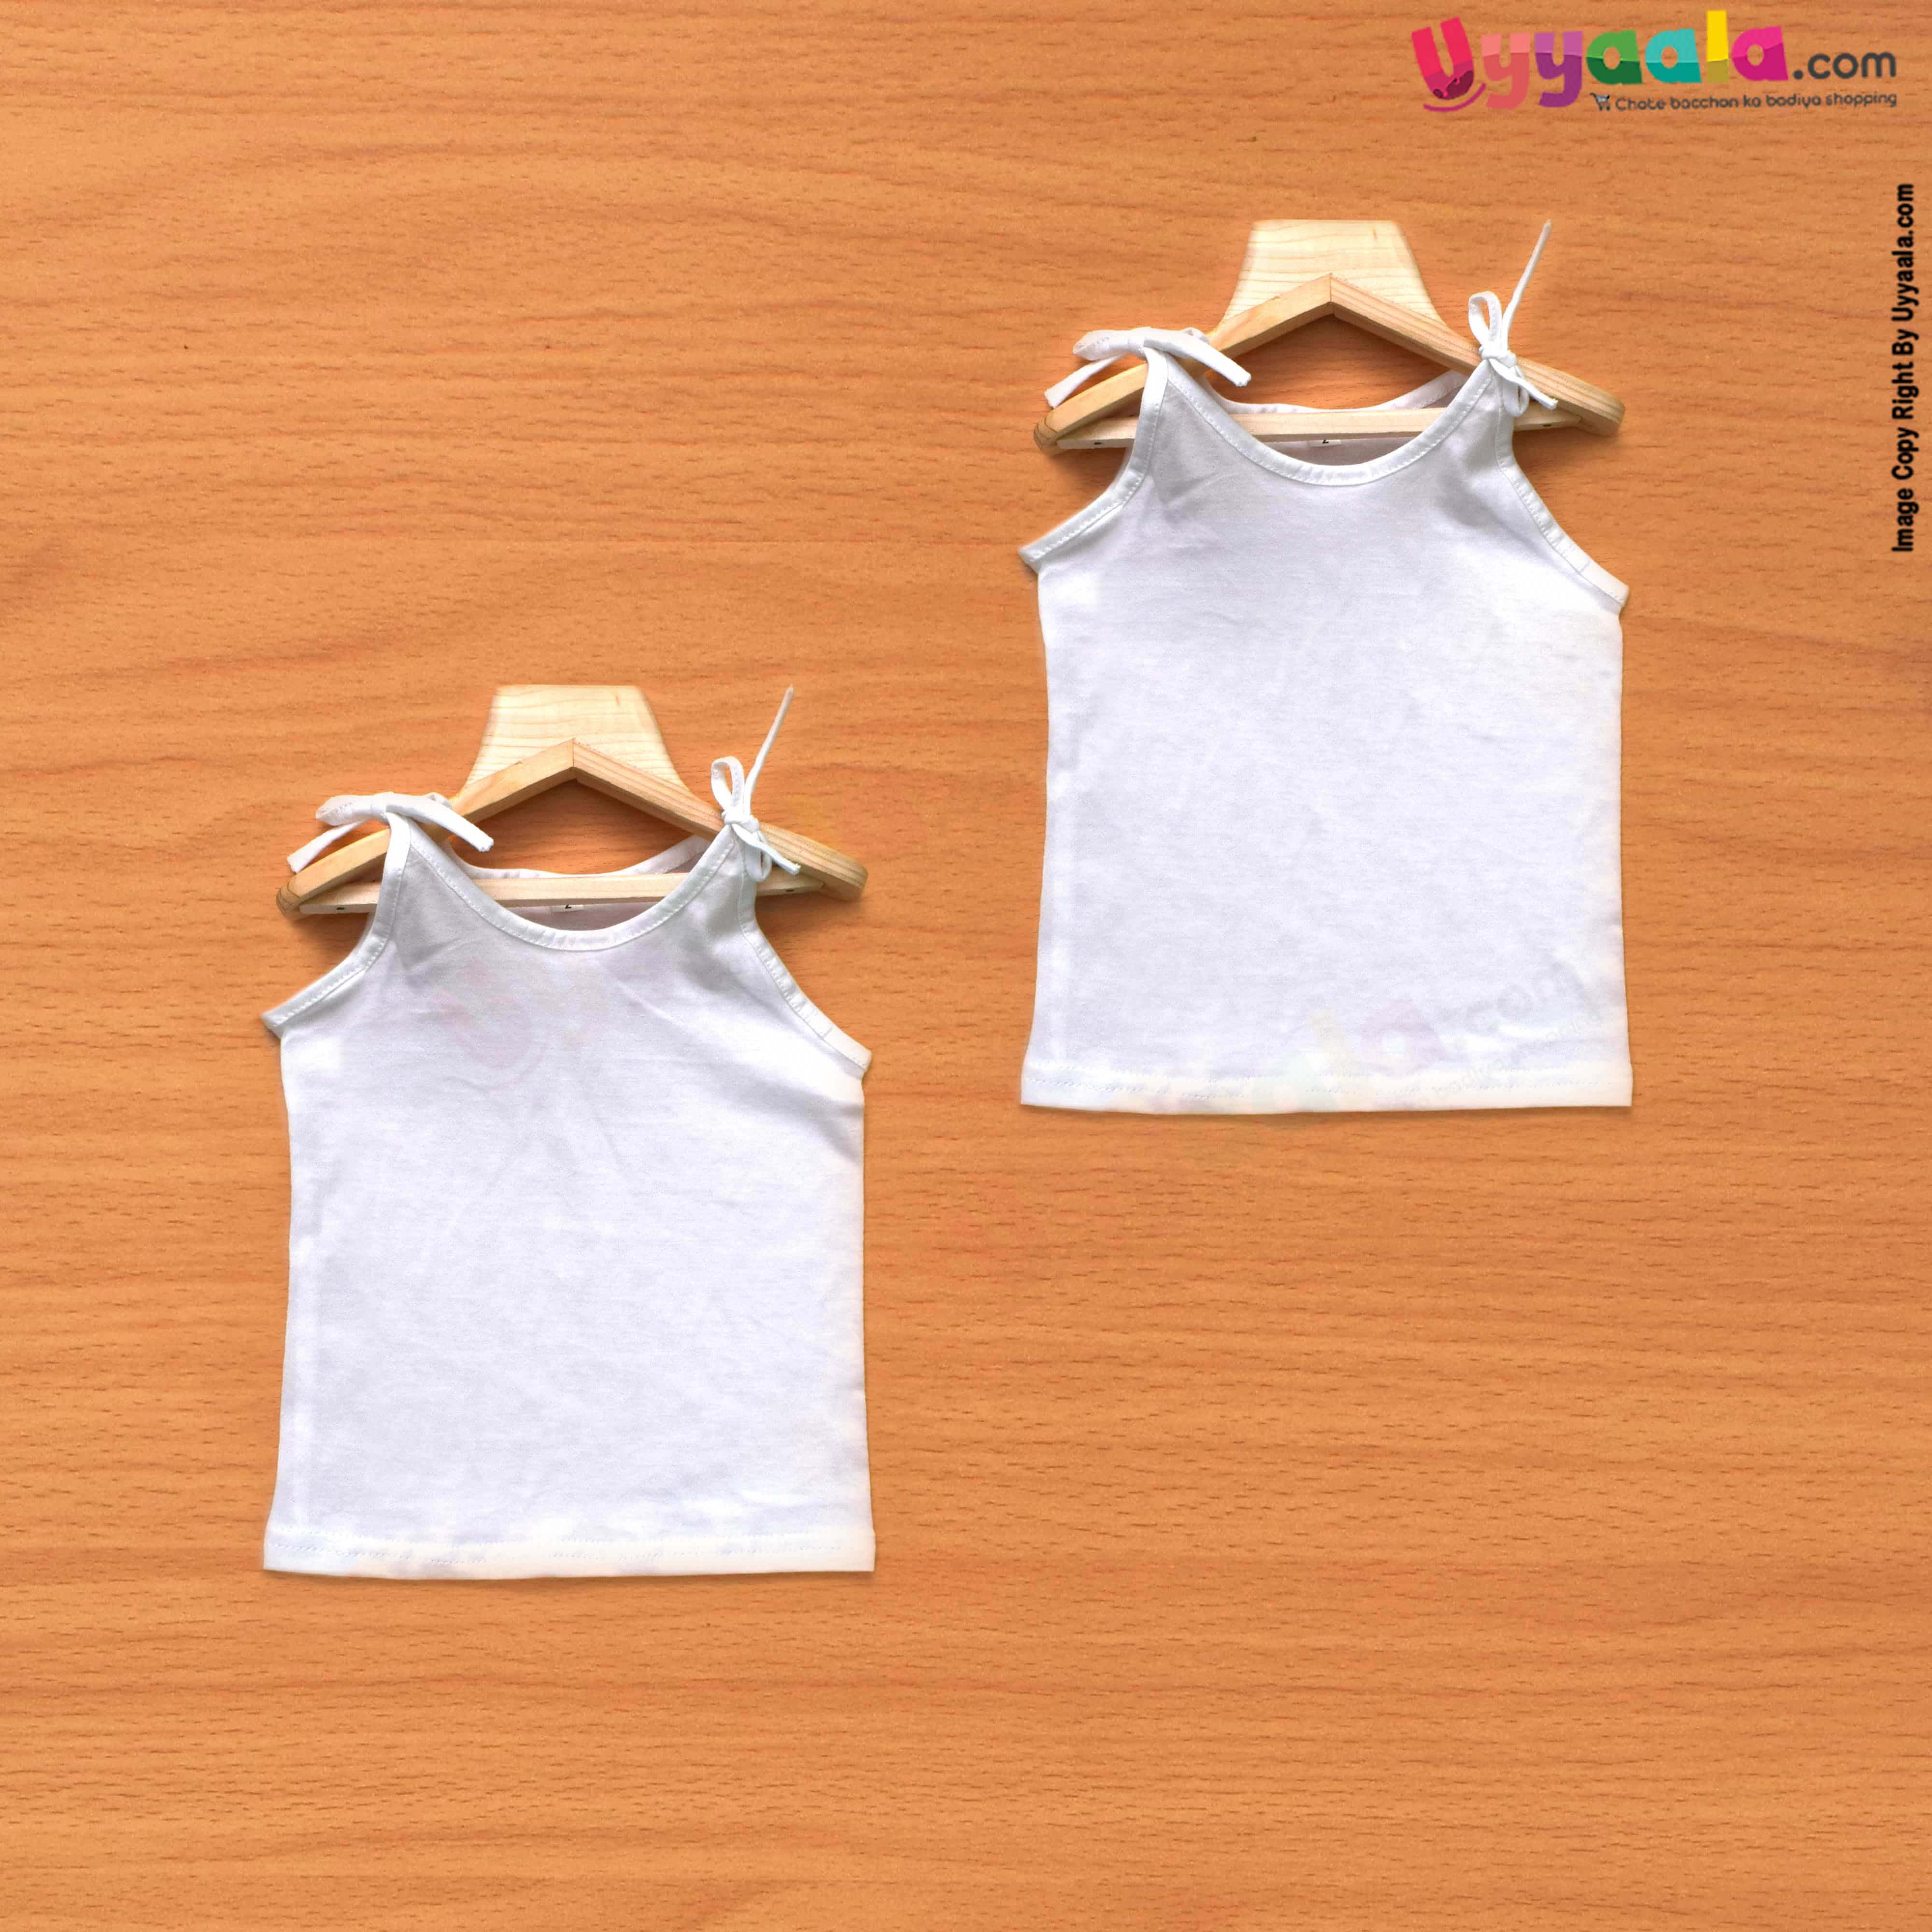 POLAR CUBS Sleeveless Baby Jabla Set, Top Opening Tie knot Lace Model, Premium Quality Glasco Cotton Baby Wear, (0-3M), 2Pack - White